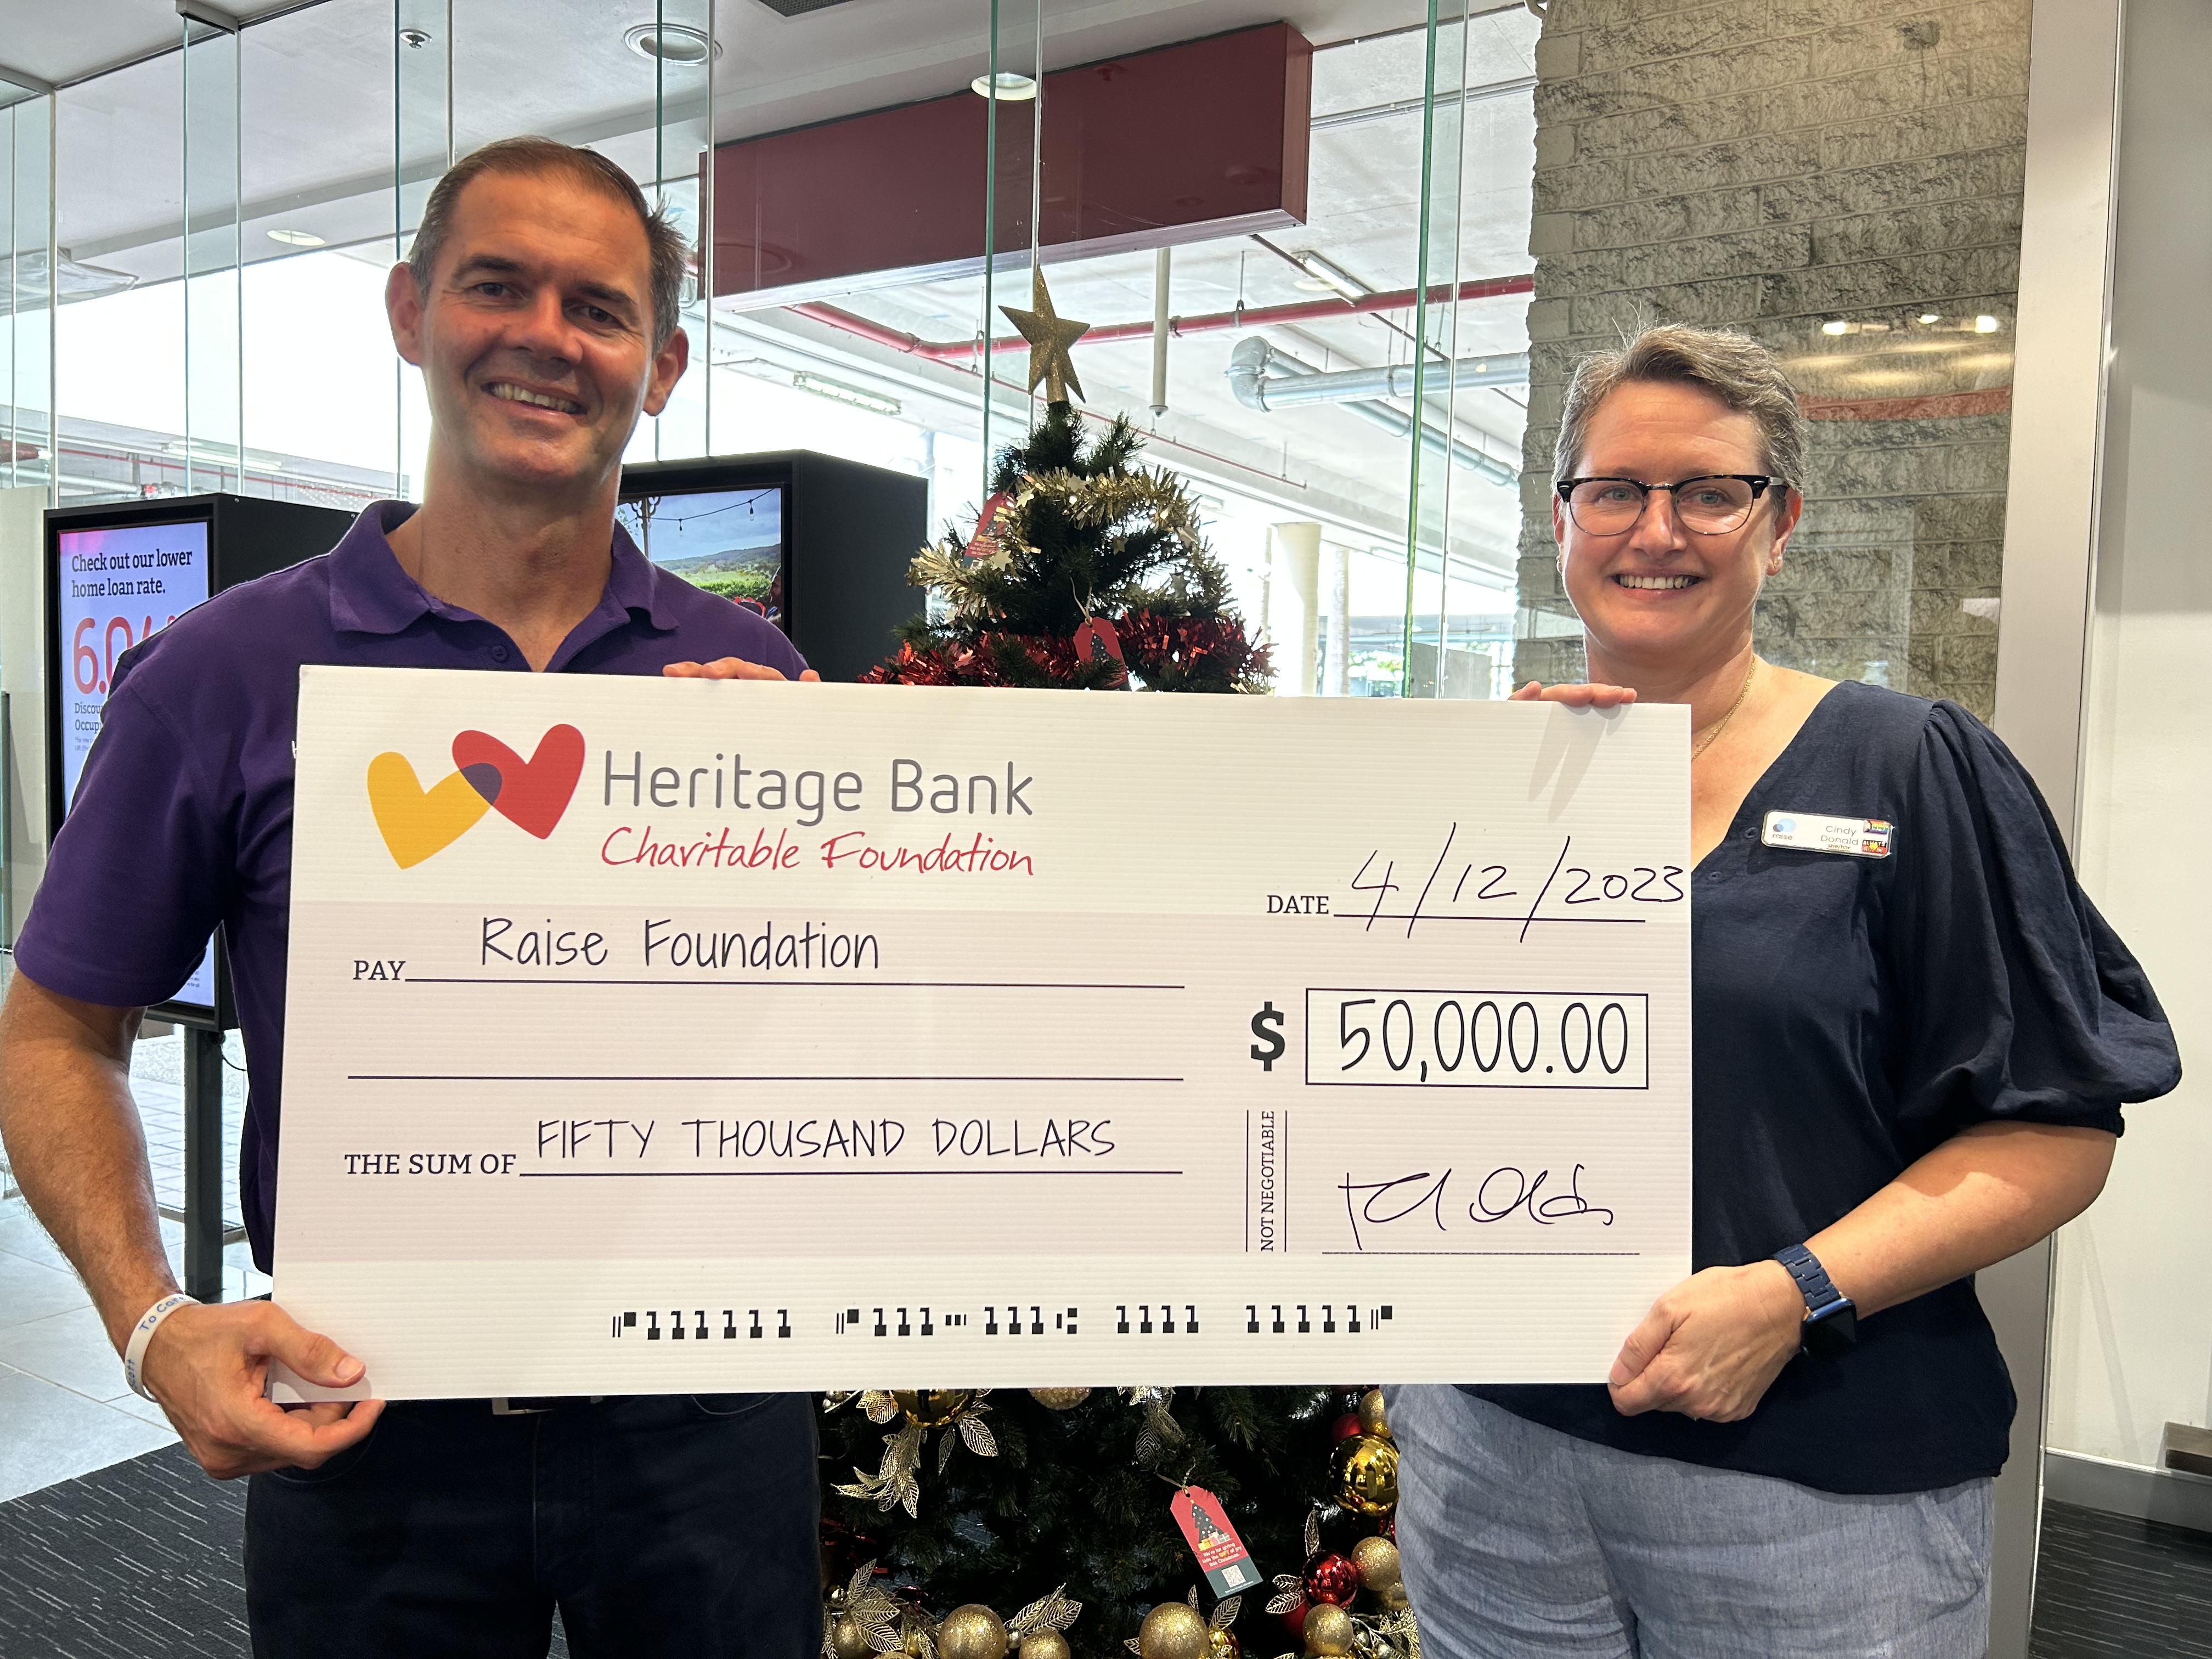 Heritage Bank Charitable Foundation Executive Officer Paul Olds and Raise Foundation QLD Program Manager Cindy Donald